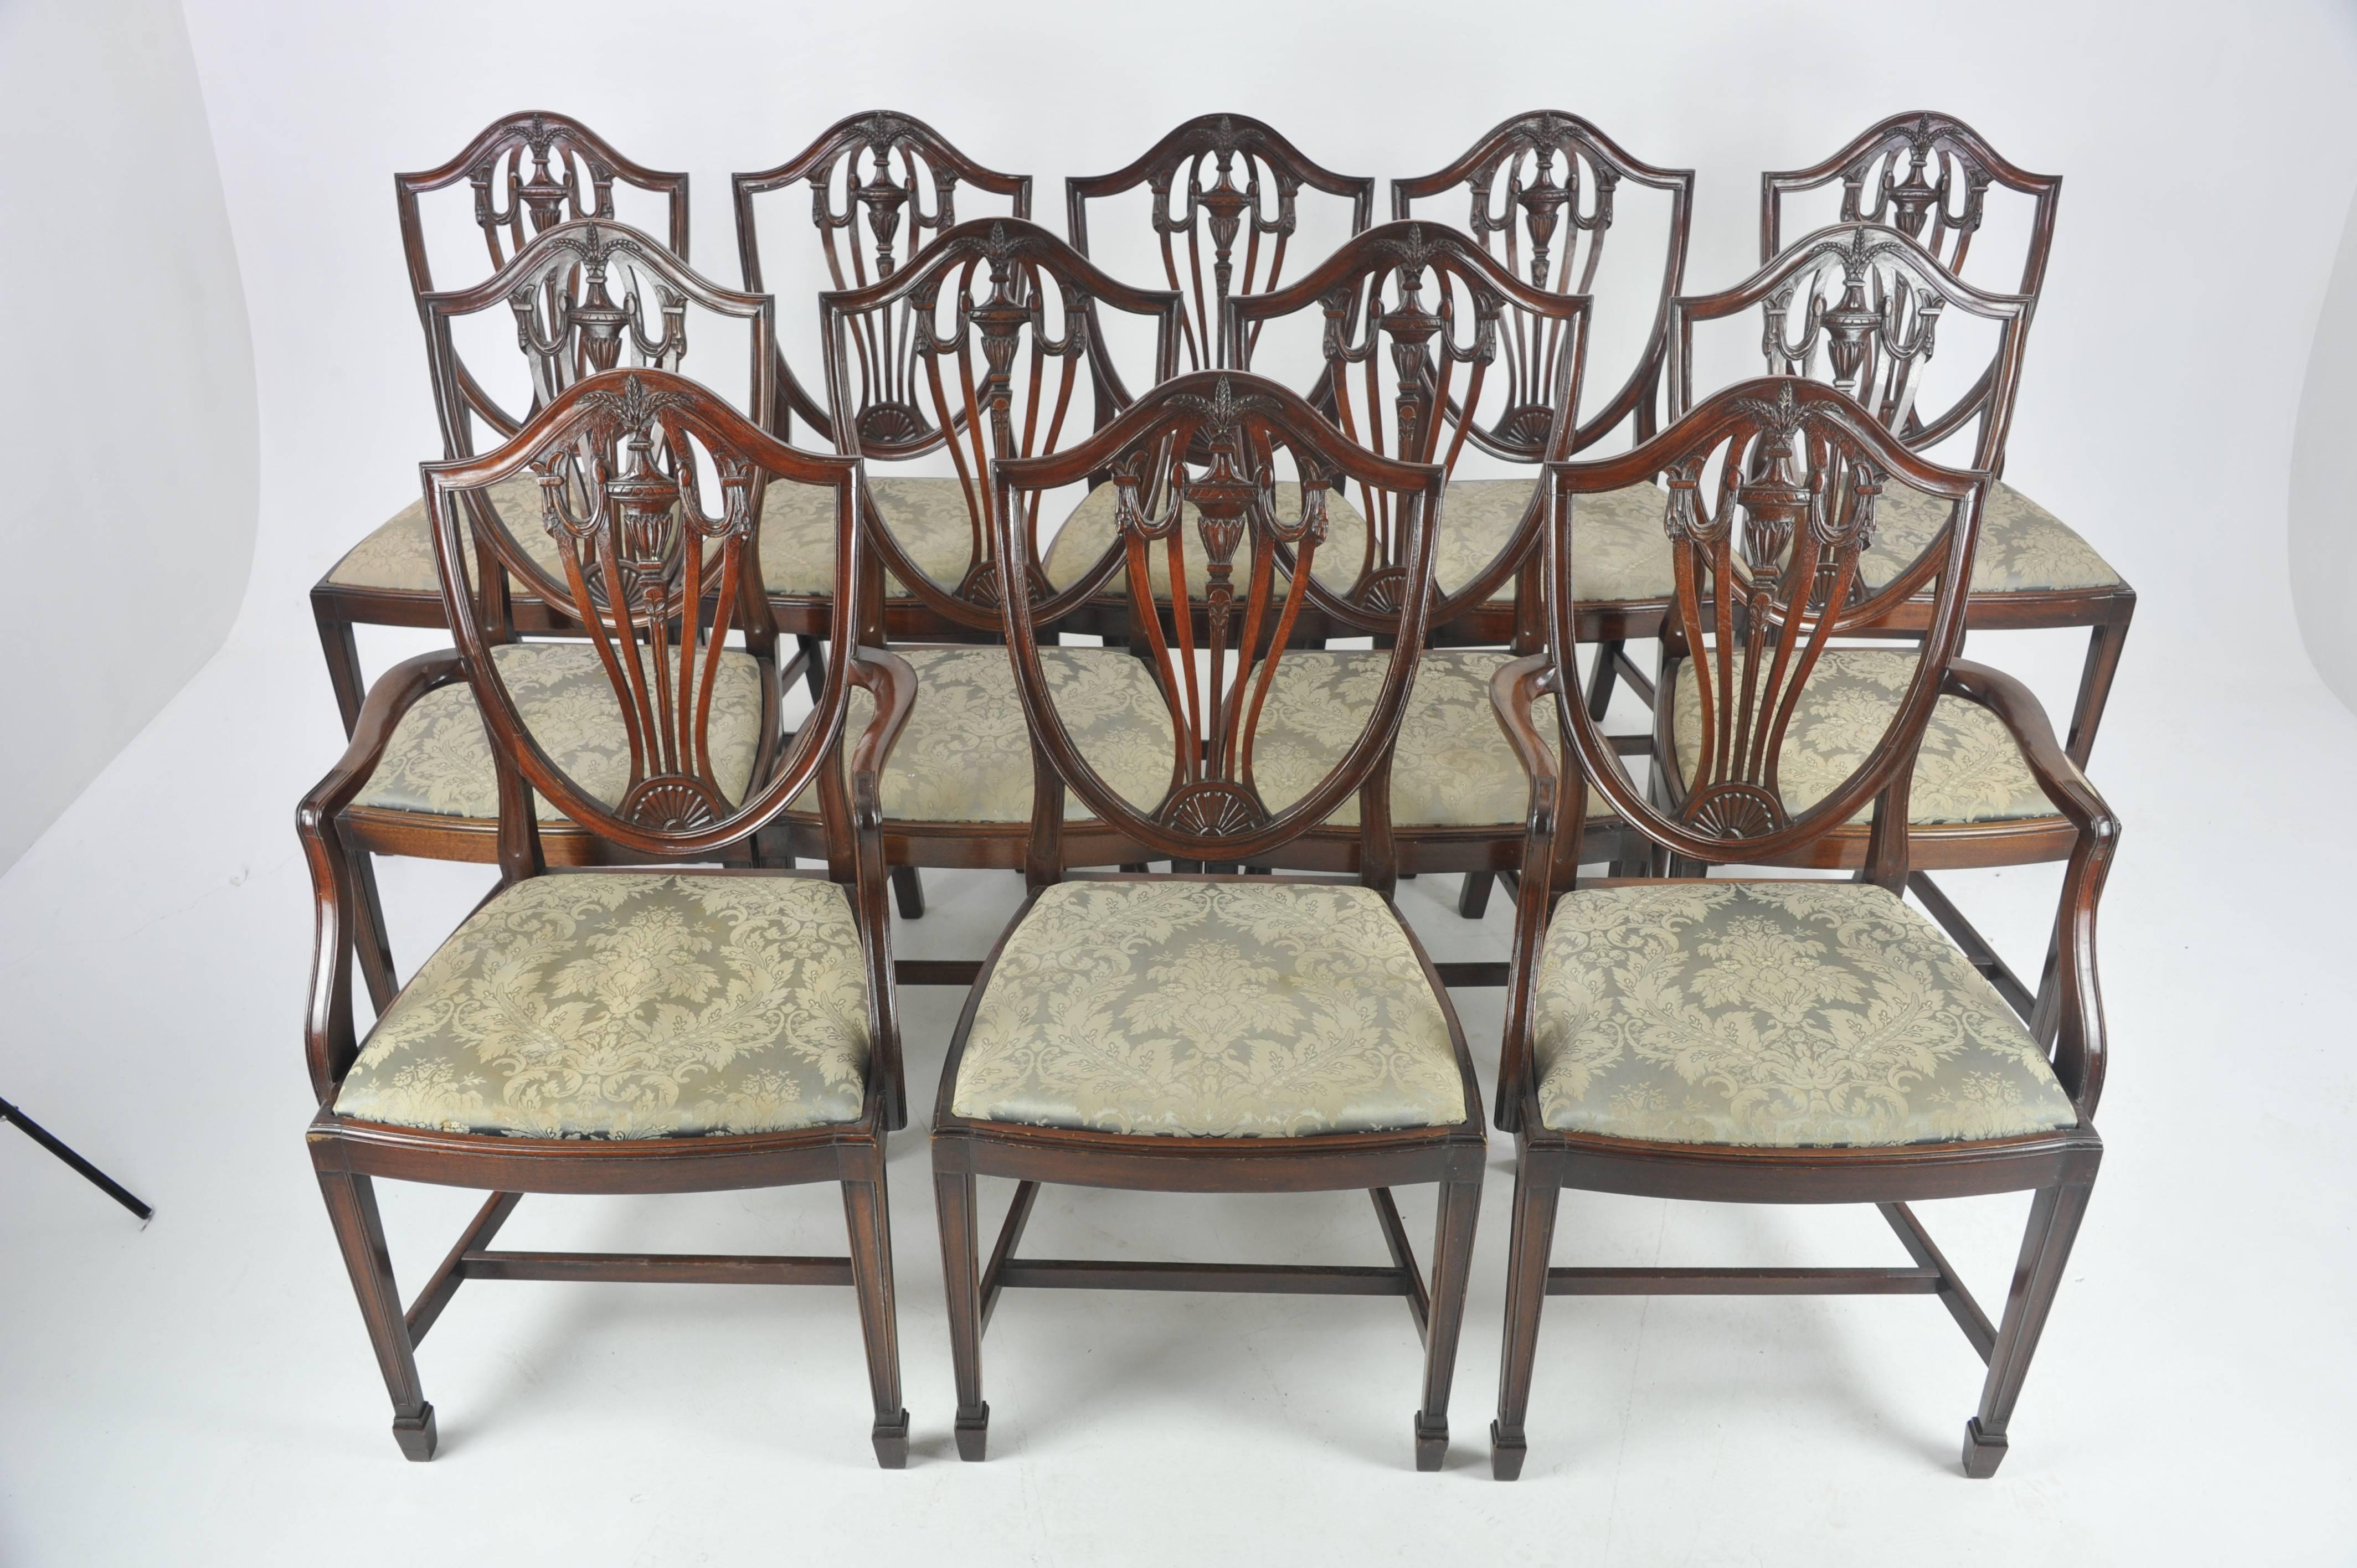 10 Dining Chairs, Antique Dining Chairs, Hepplewhite, Mahogany, B1071 REDUCED!!! 3